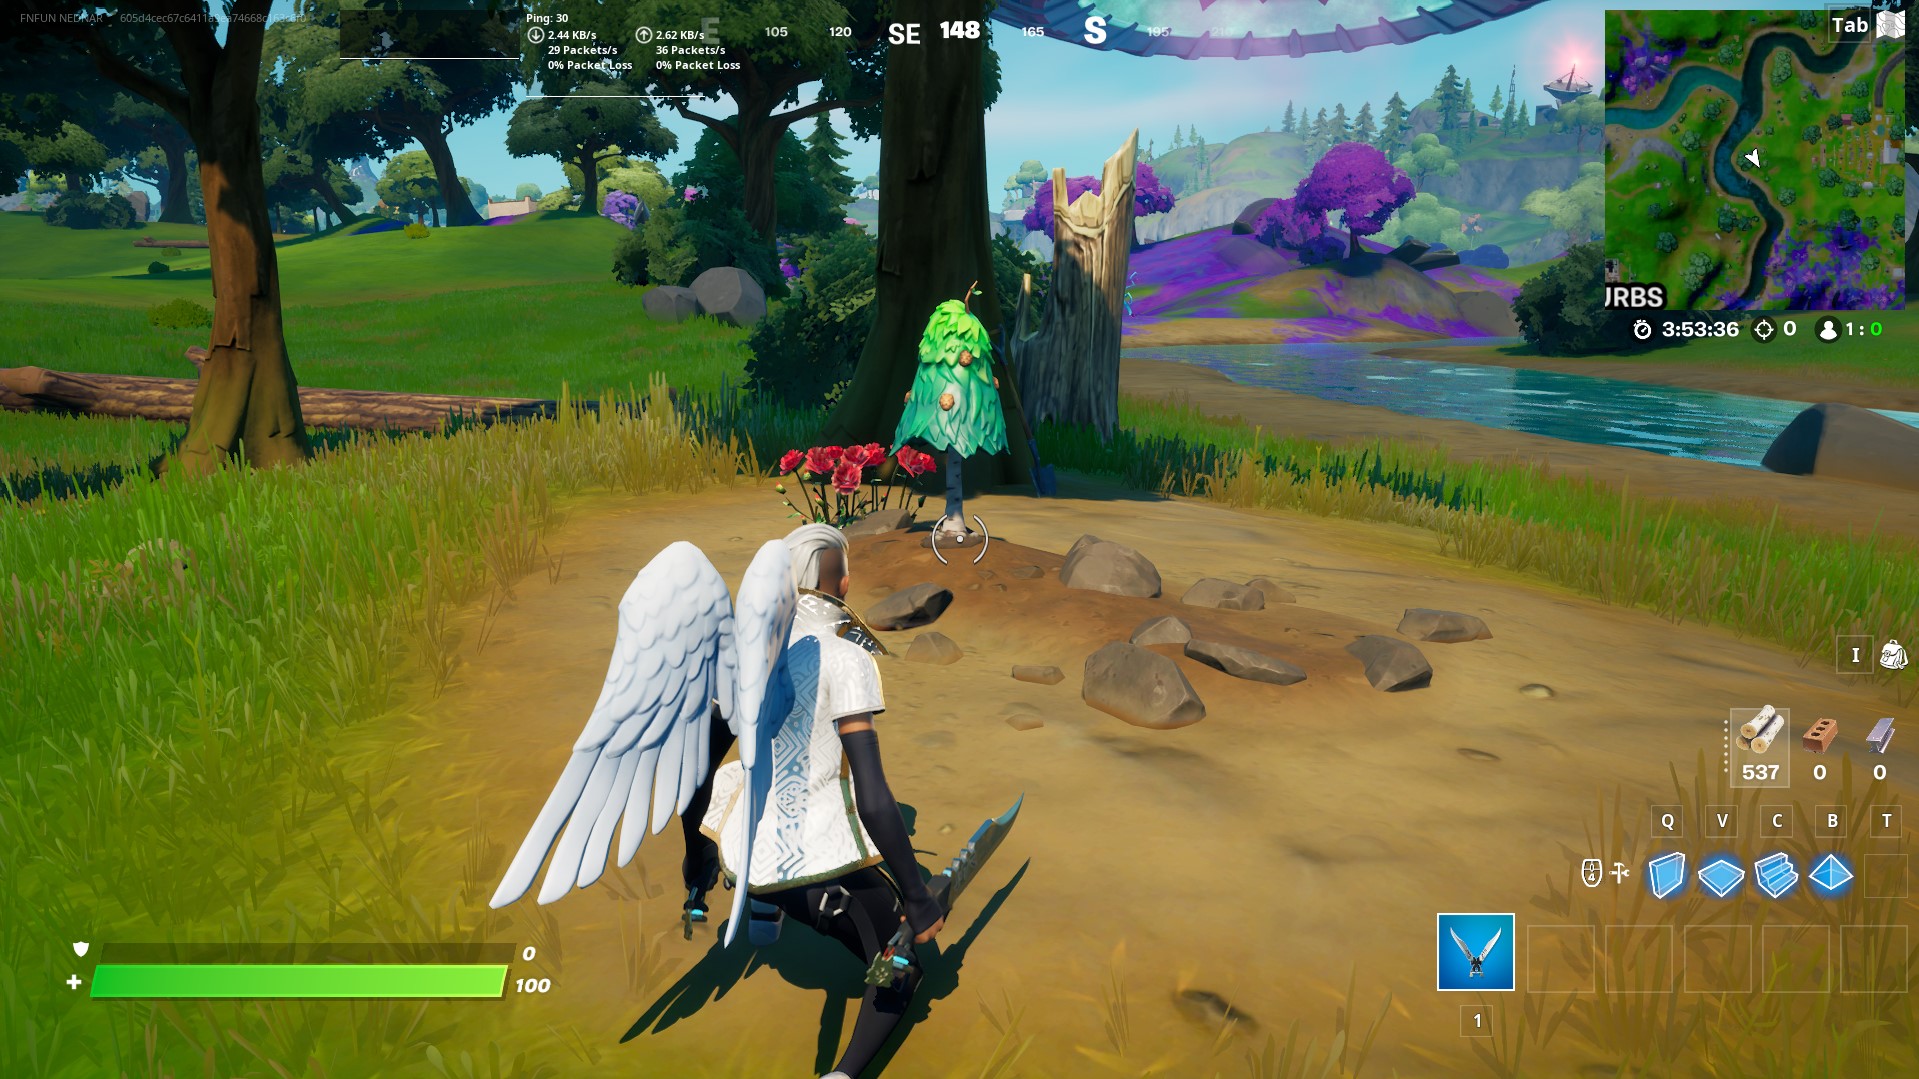 Fortnite 17.30 update patch notes: Slurpy Swamp abduction, new NPCs and the Grab-itron  